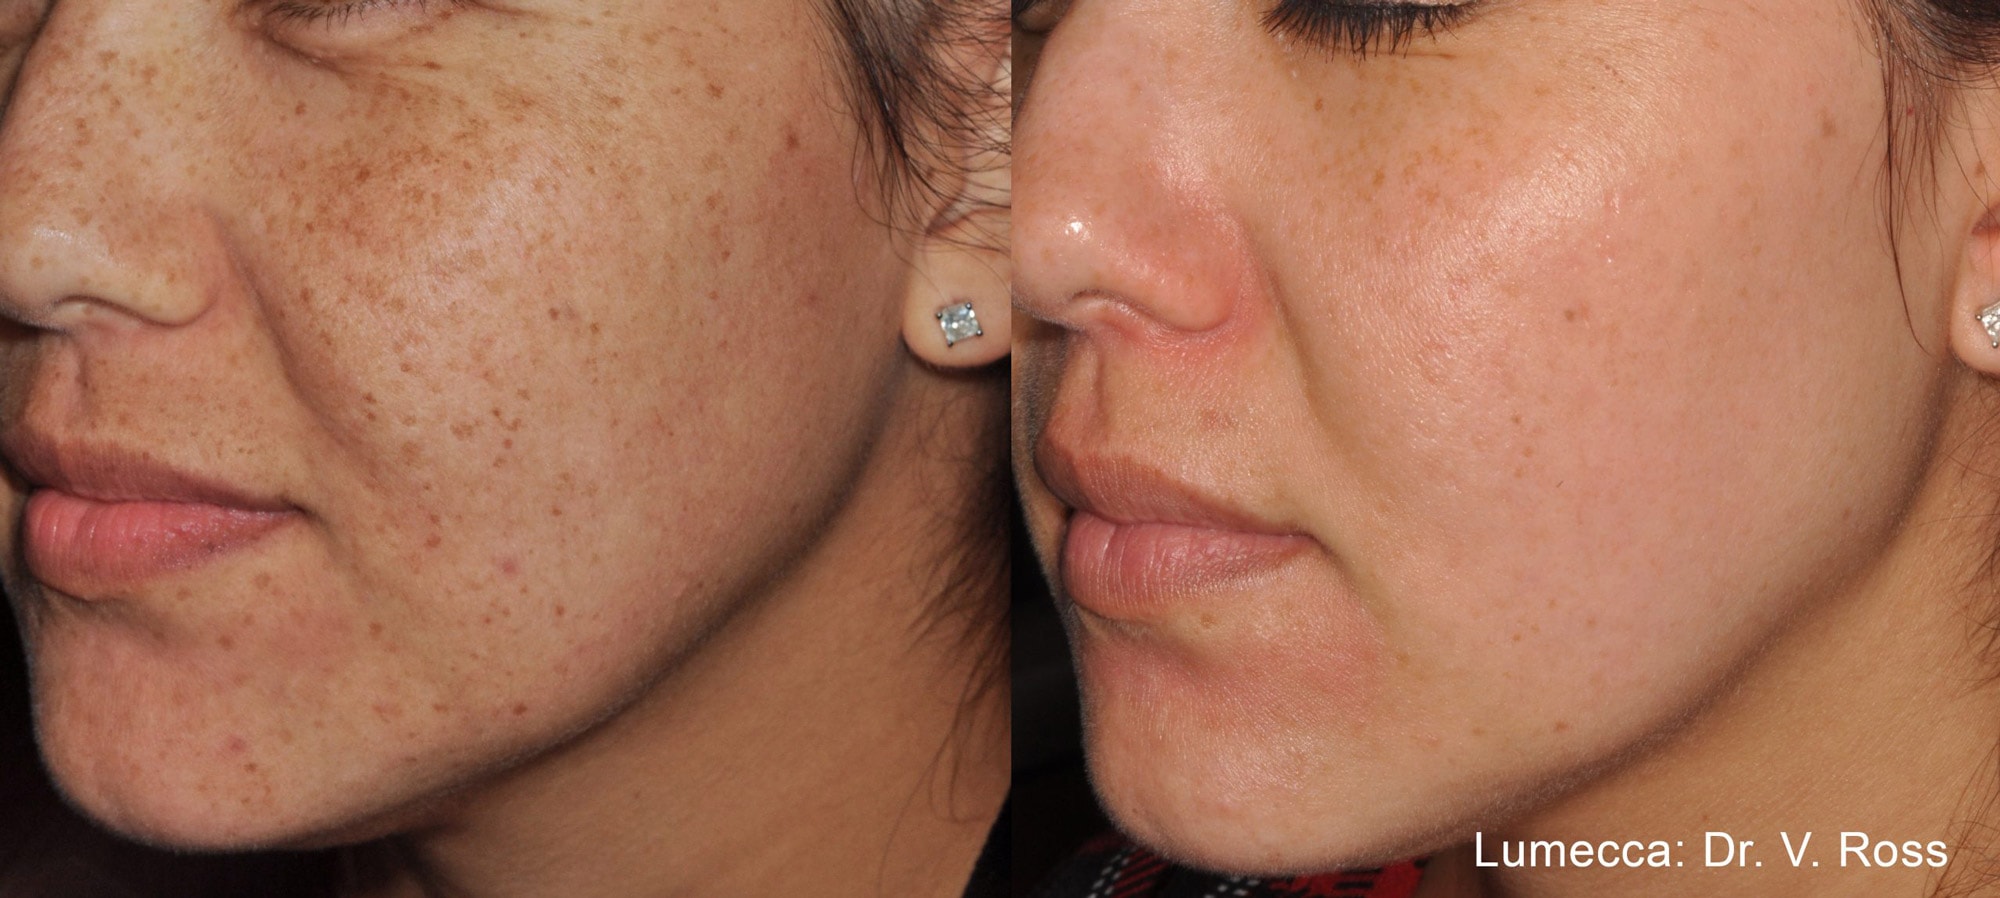 Before and After photos showing Lumecca treatments improving texture and reducing freckles and pigmentation on a woman’s face